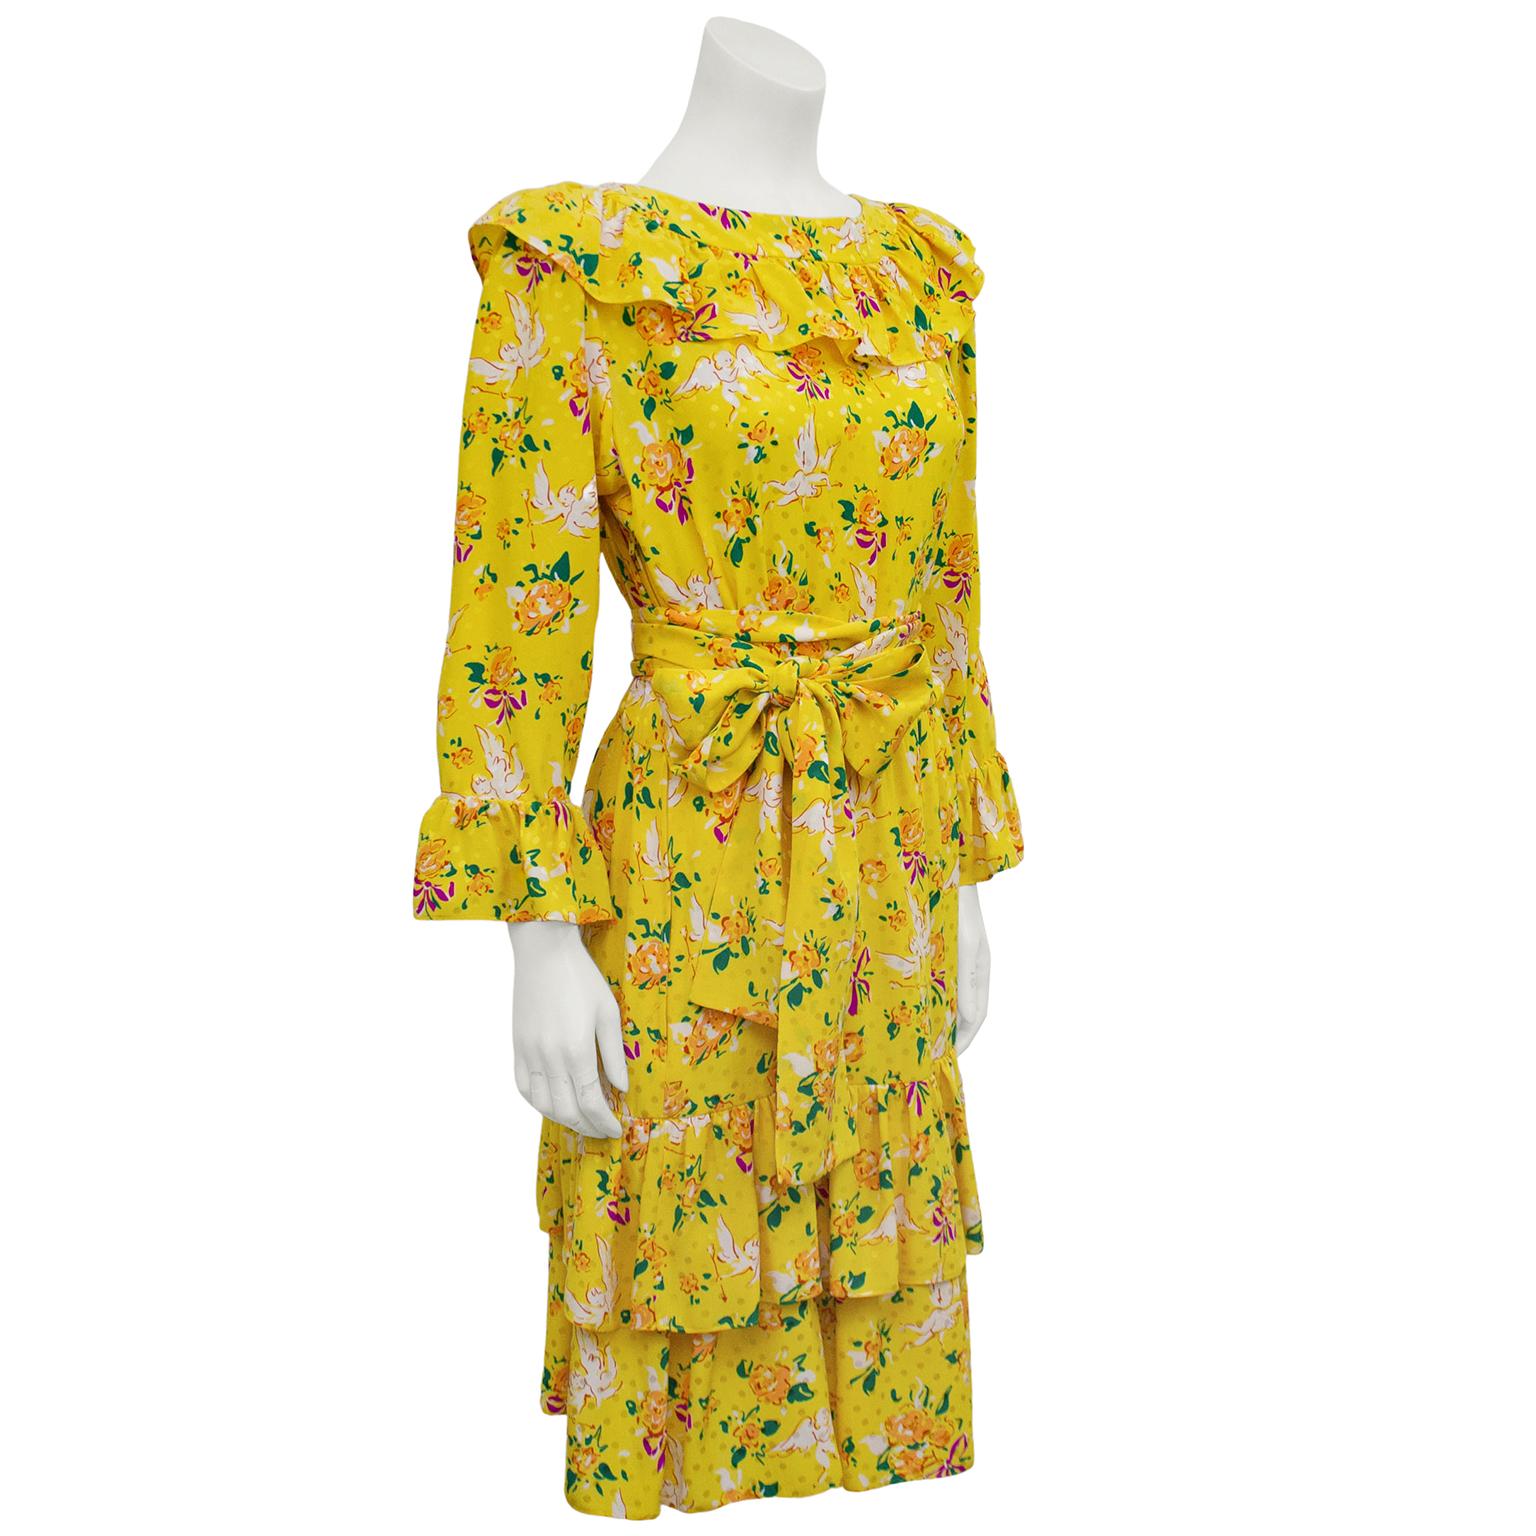 Early Yves Saint Laurent bright yellow, long sleeve, silk jacquard dress from the 1970s. Monochromatic yellow silk with yellow polka dots allover. Print includes cute white cupids, orange, green and red flowers with purple bows. Large ruffle at